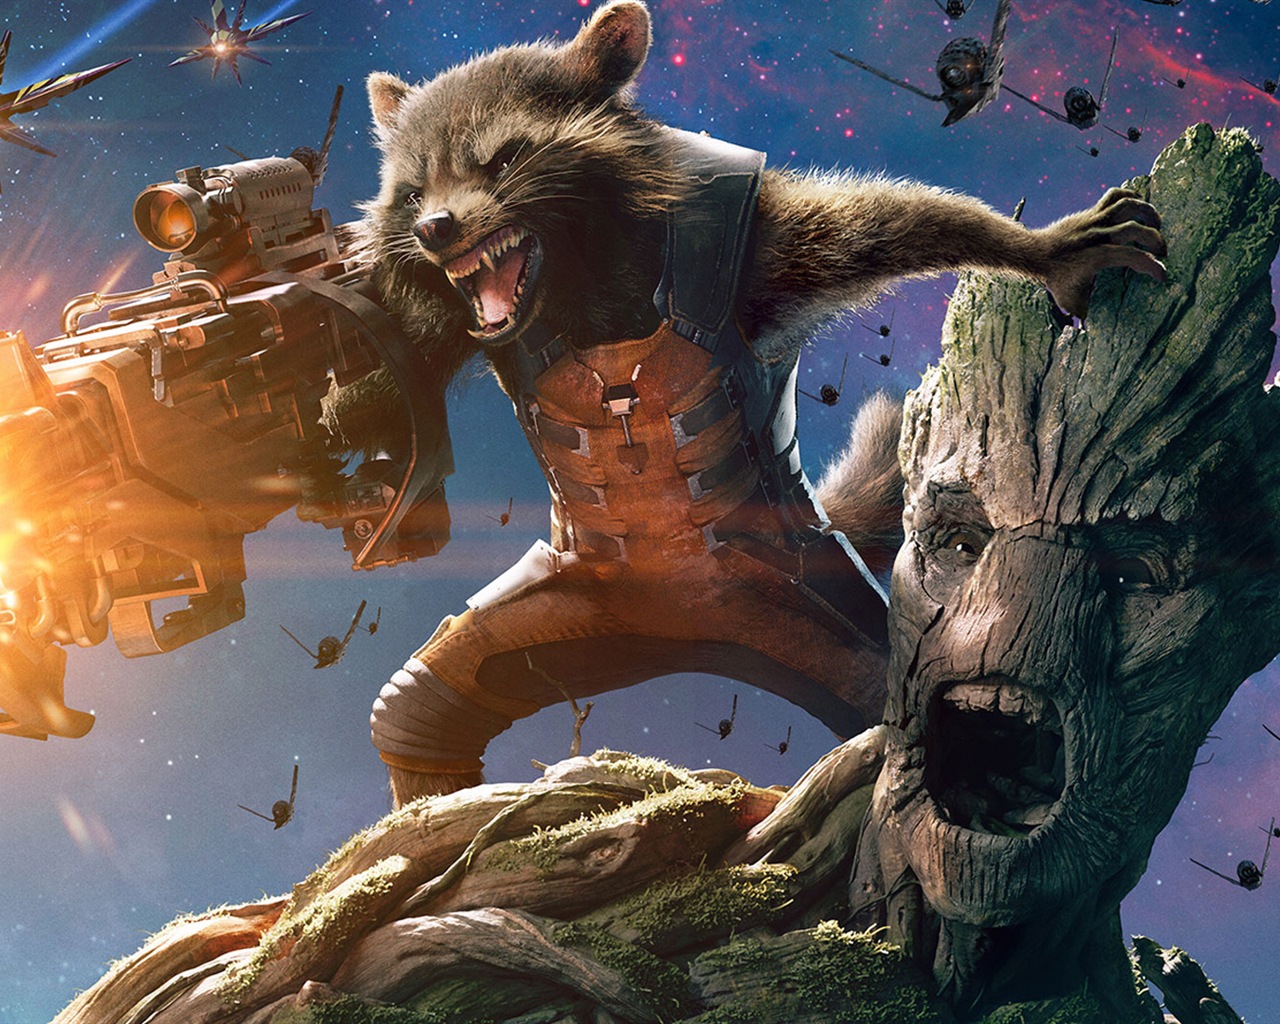 Guardians of the Galaxy 2014 HD movie wallpapers #14 - 1280x1024